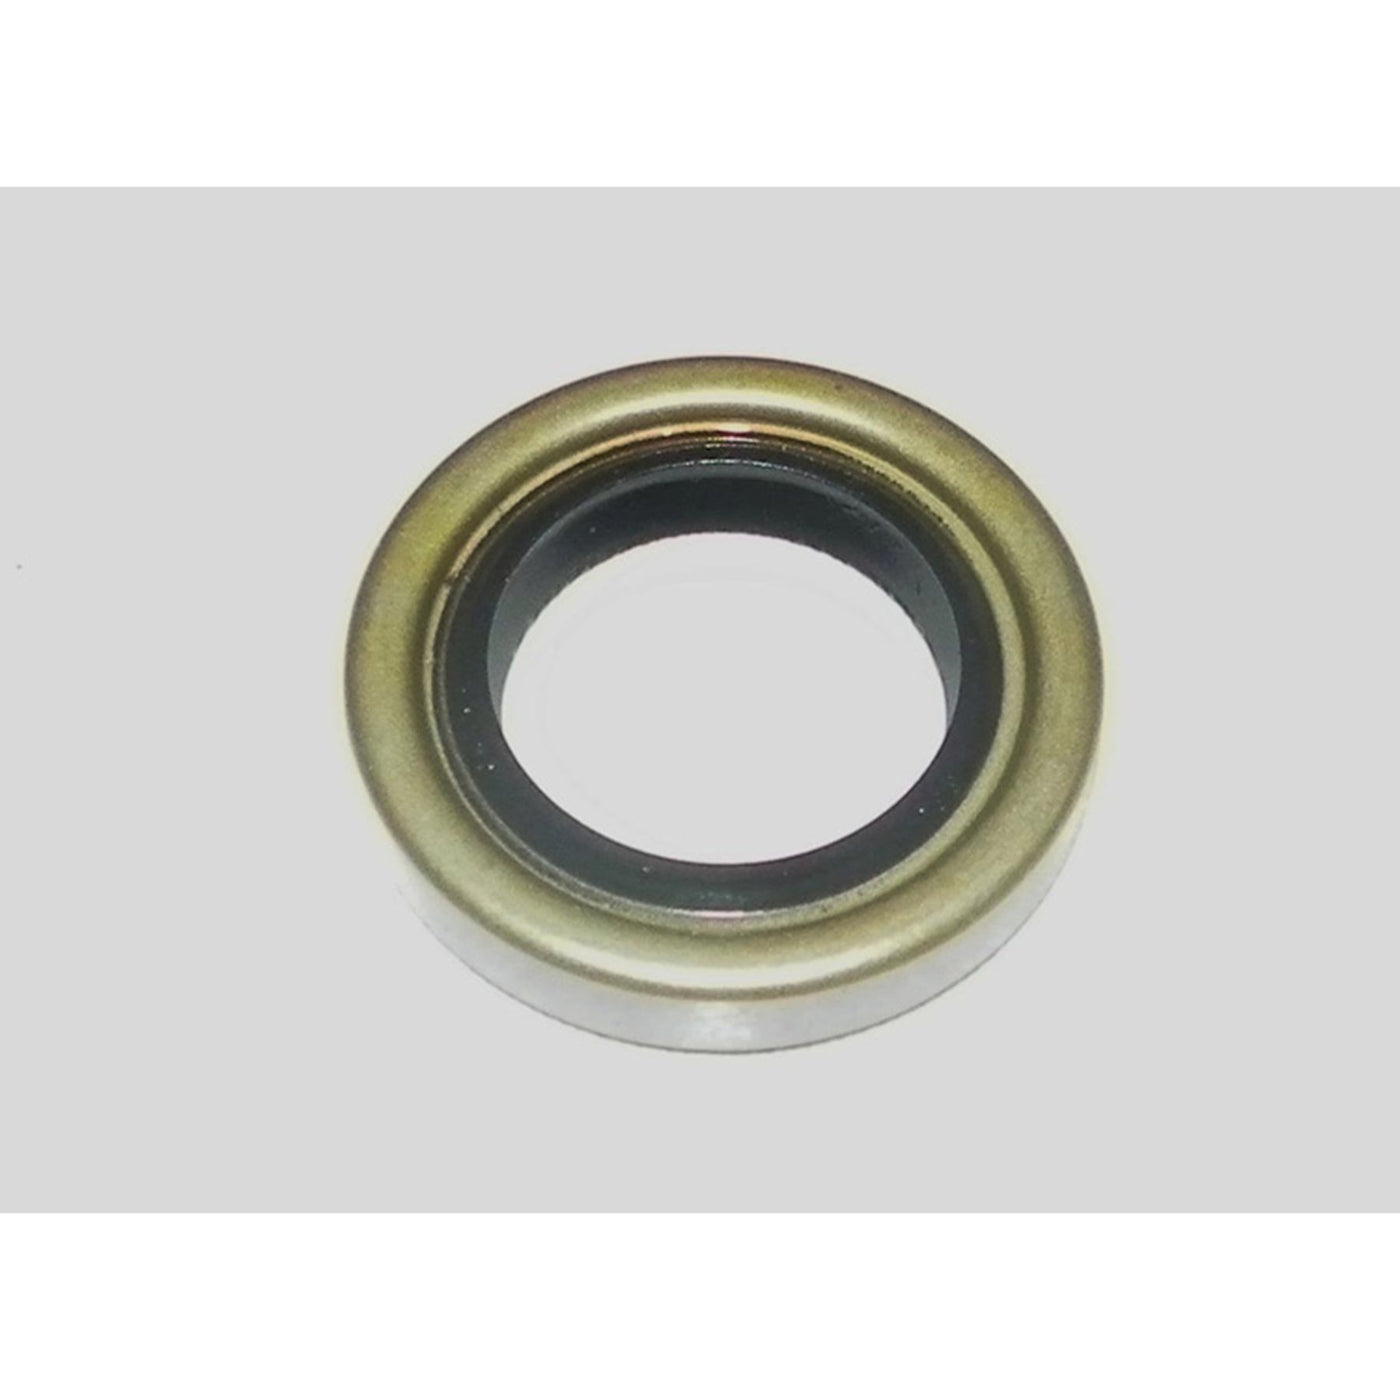 WSM 009-730-01 Carrier Seal #009-730-01